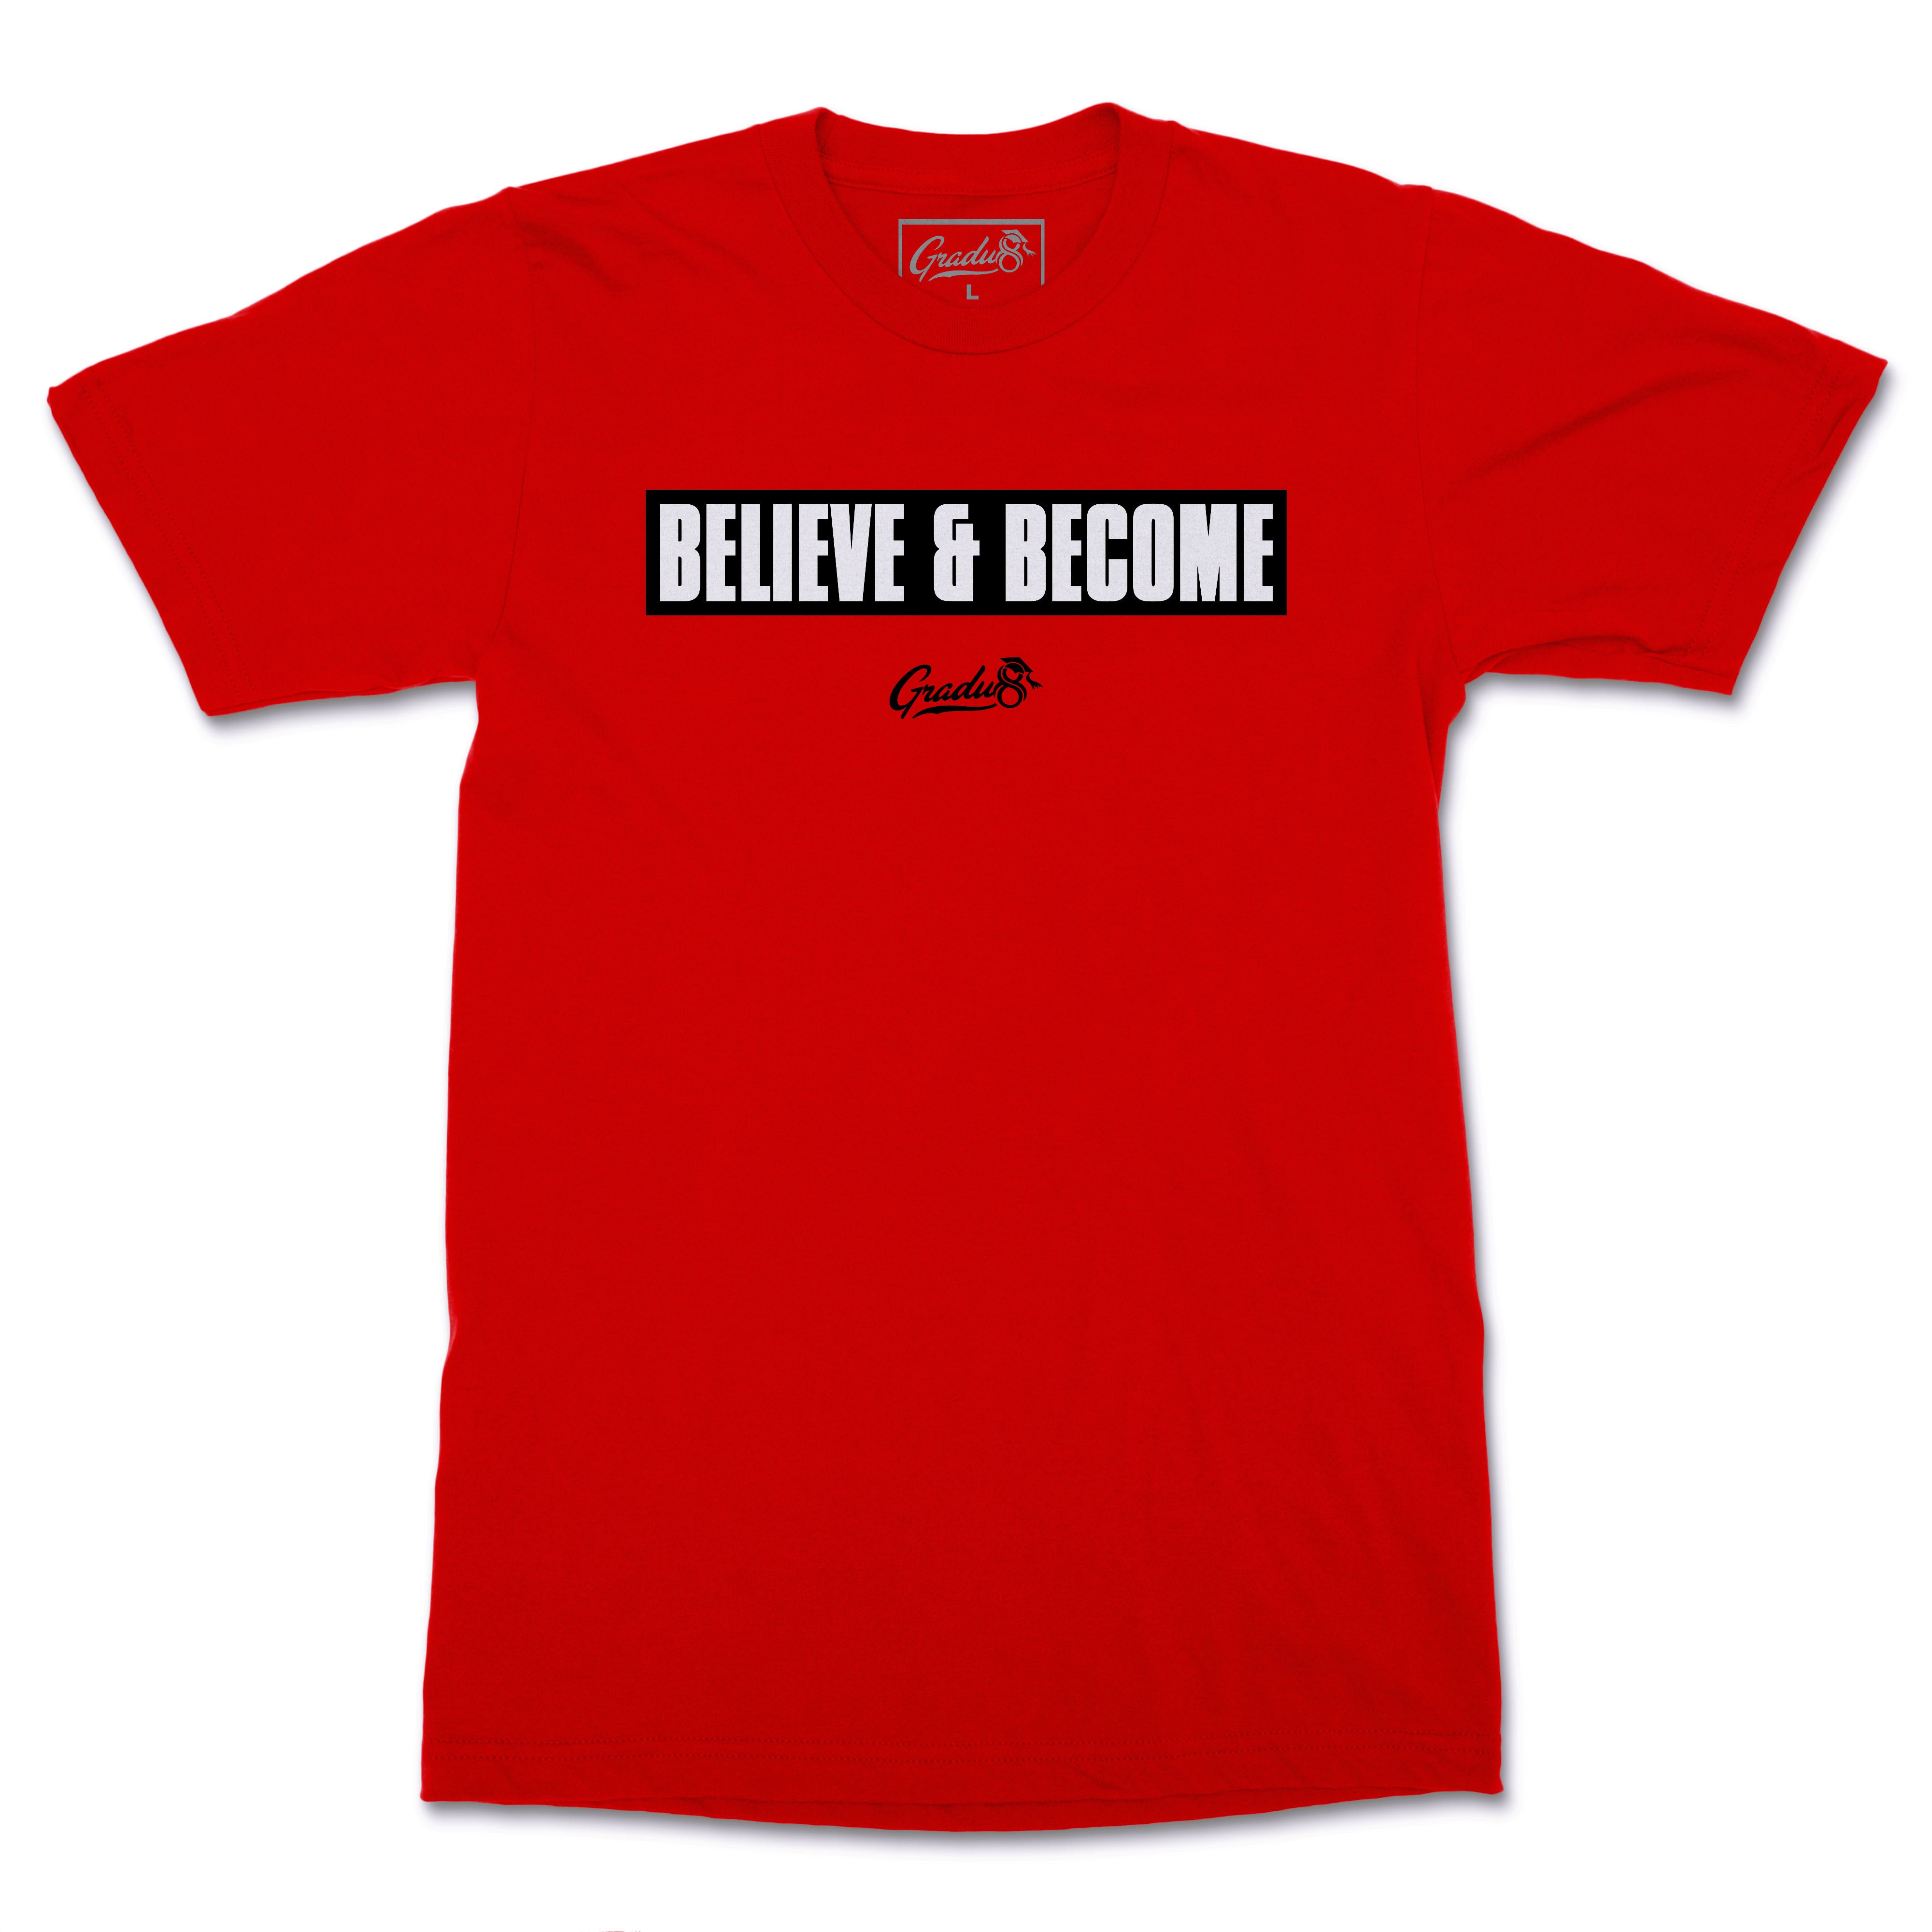 Believe & Become Black Label Premium T-Shirt - Red